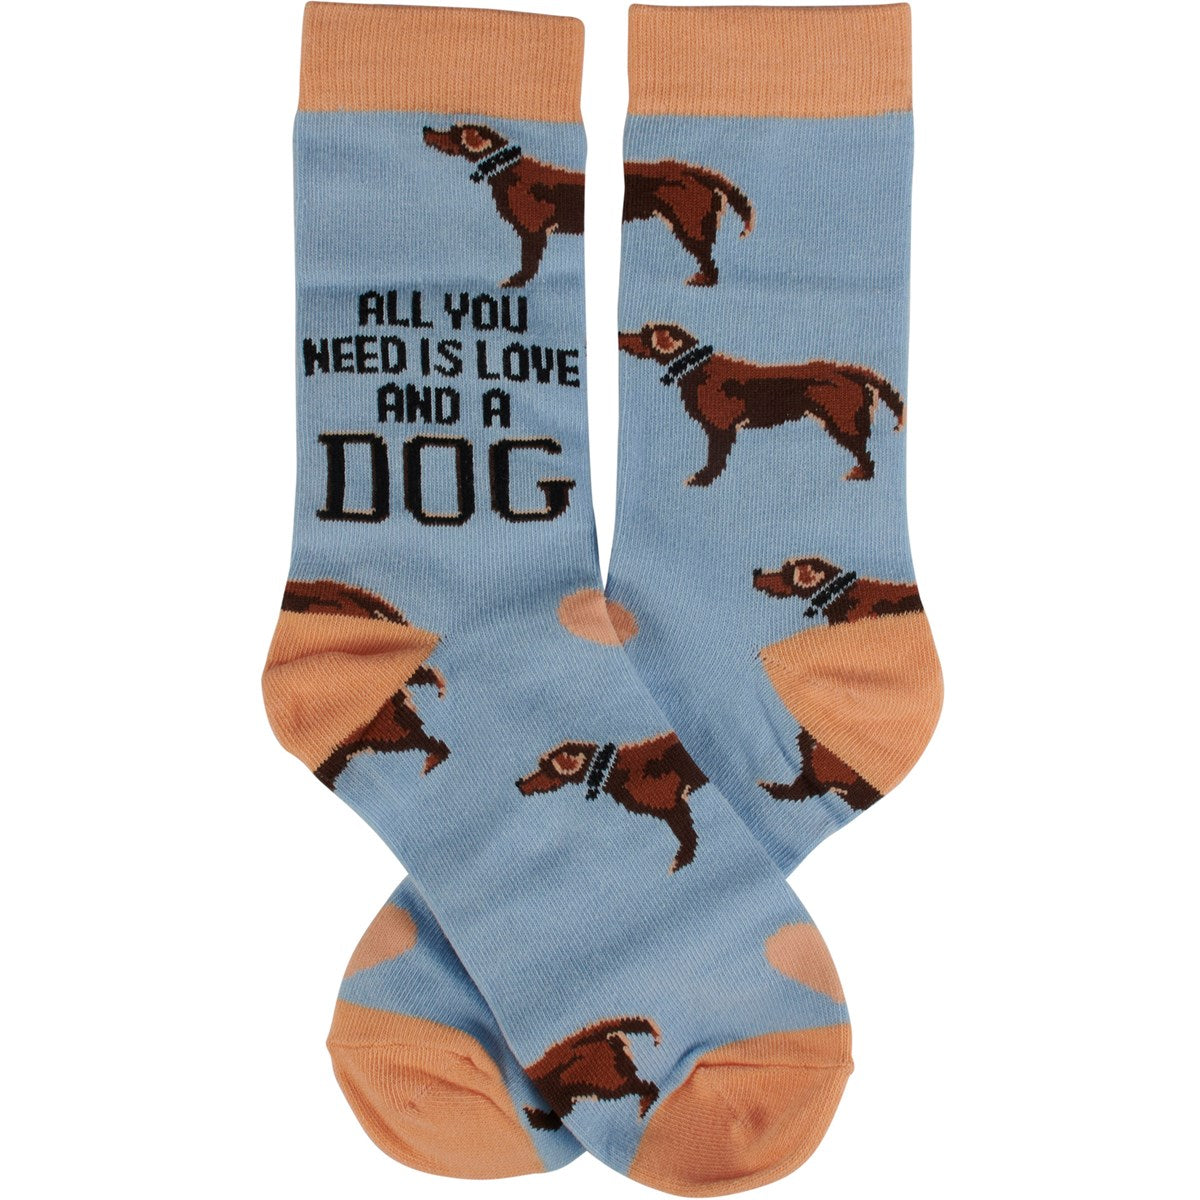 Socks & Box Sign Set "All You Need Is Love And A Dog"